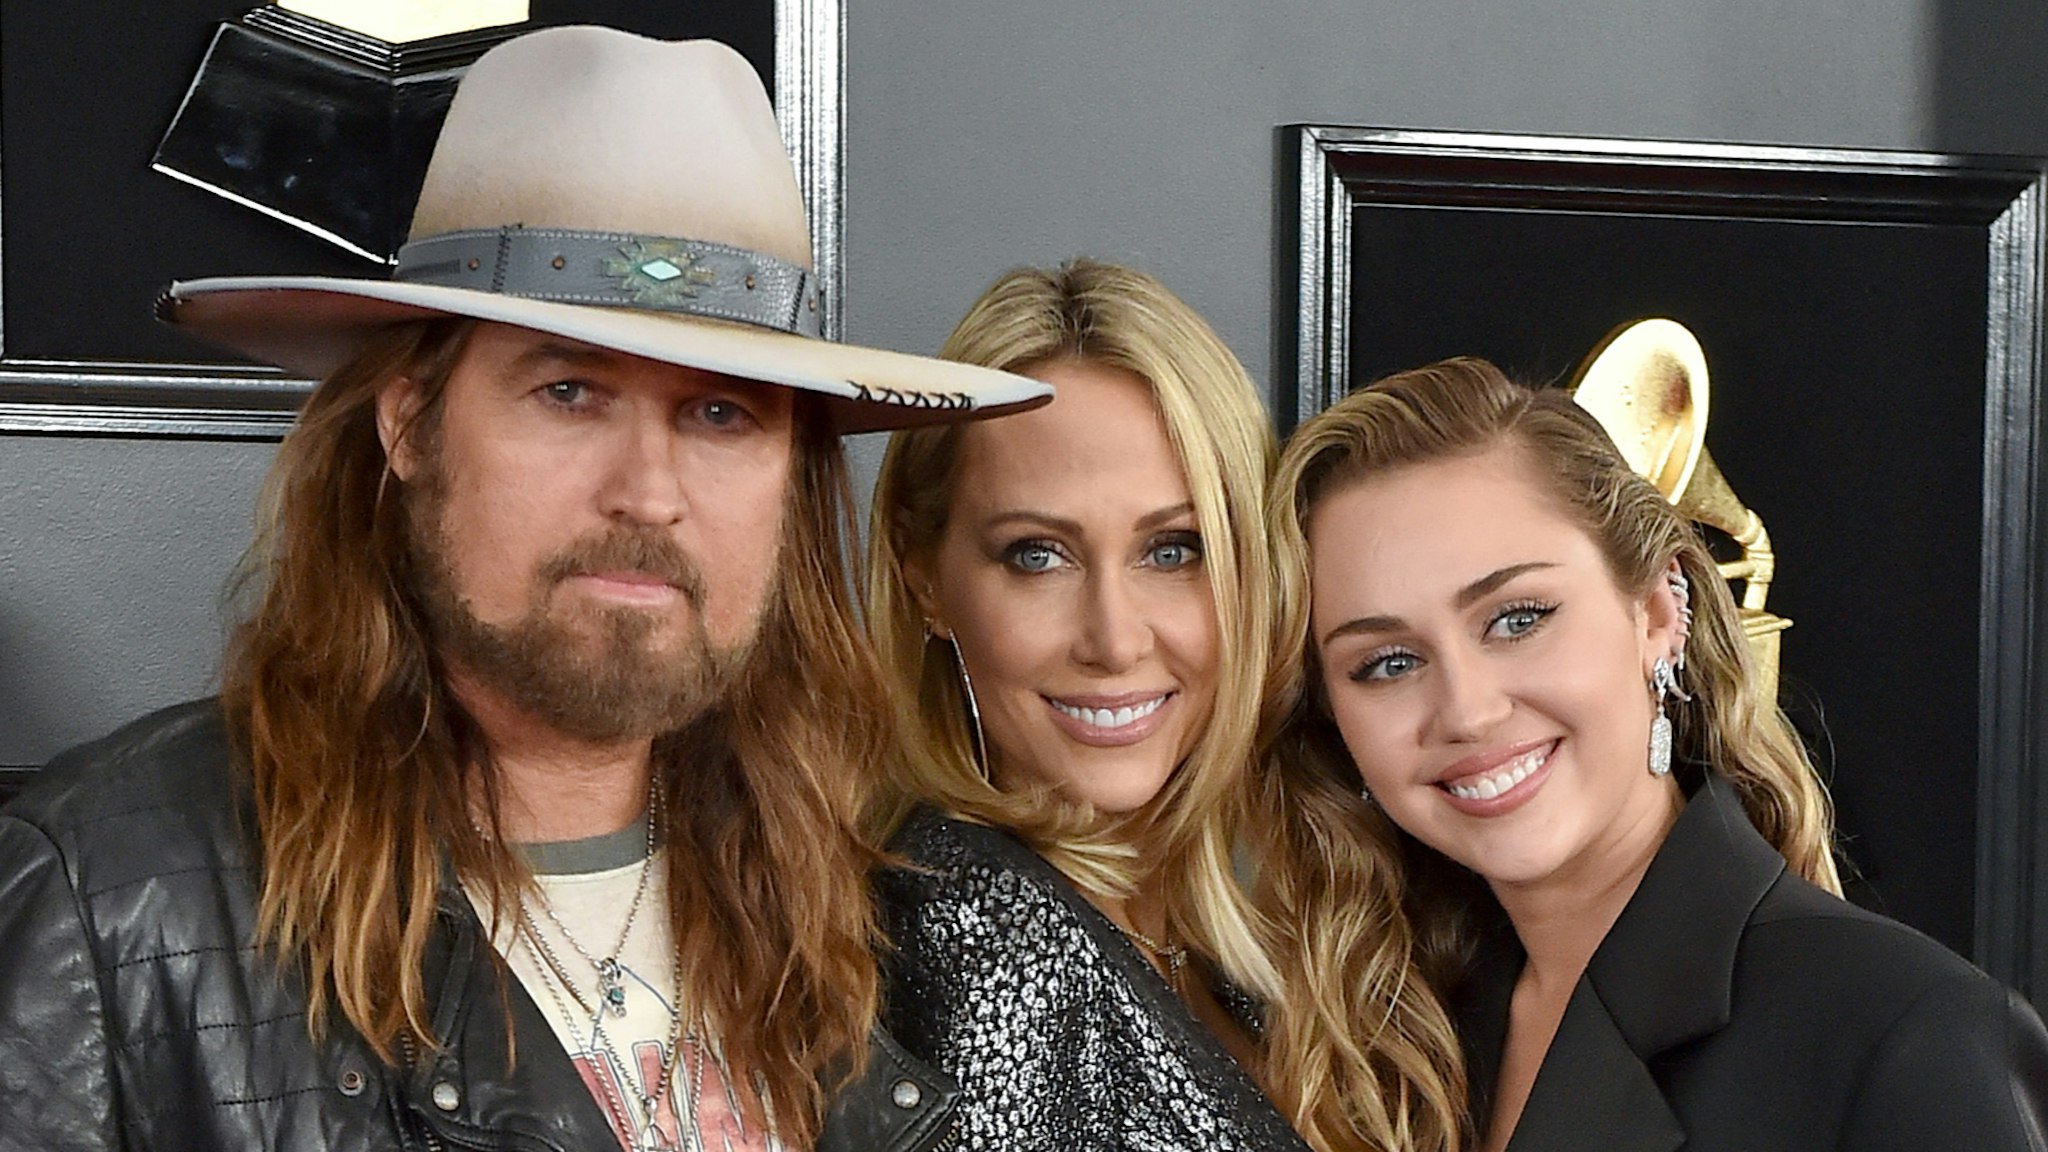 (L-R) Billy Ray Cyrus, Tish Cyrus, and Miley Cyrus attend the 61st Annual GRAMMY Awards at Staples Center on February 10, 2019 in Los Angeles, California.